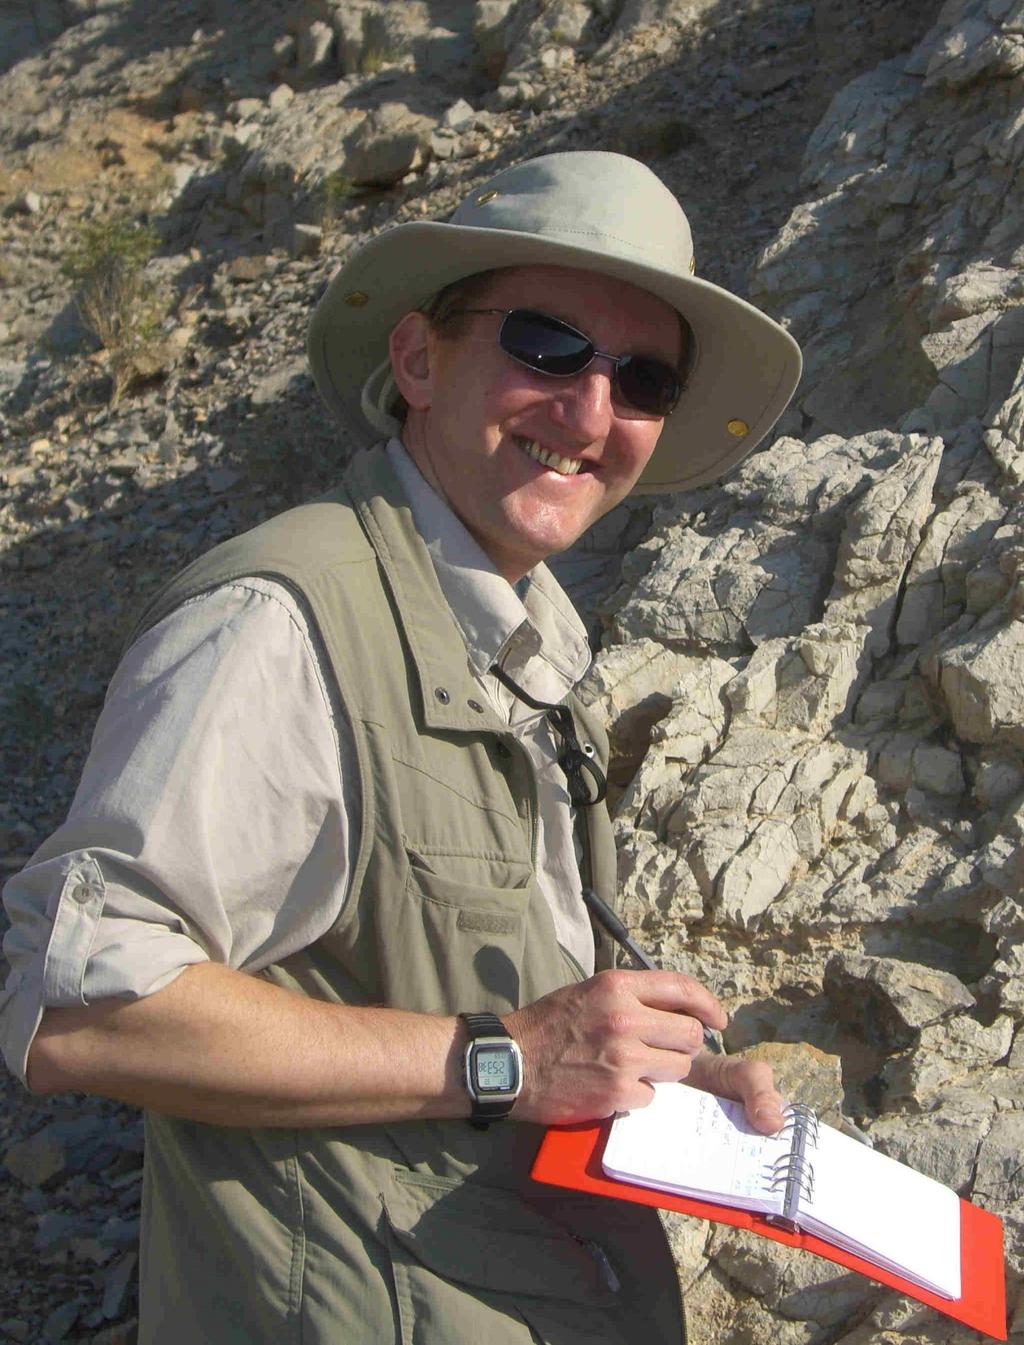 Clive Mitchell 28 years at the British Geological Survey (BGS) as Industrial Minerals Specialist Chartered Geologist (CGeol), Geological Society of London Head of Communications, BGS Since 2002, key